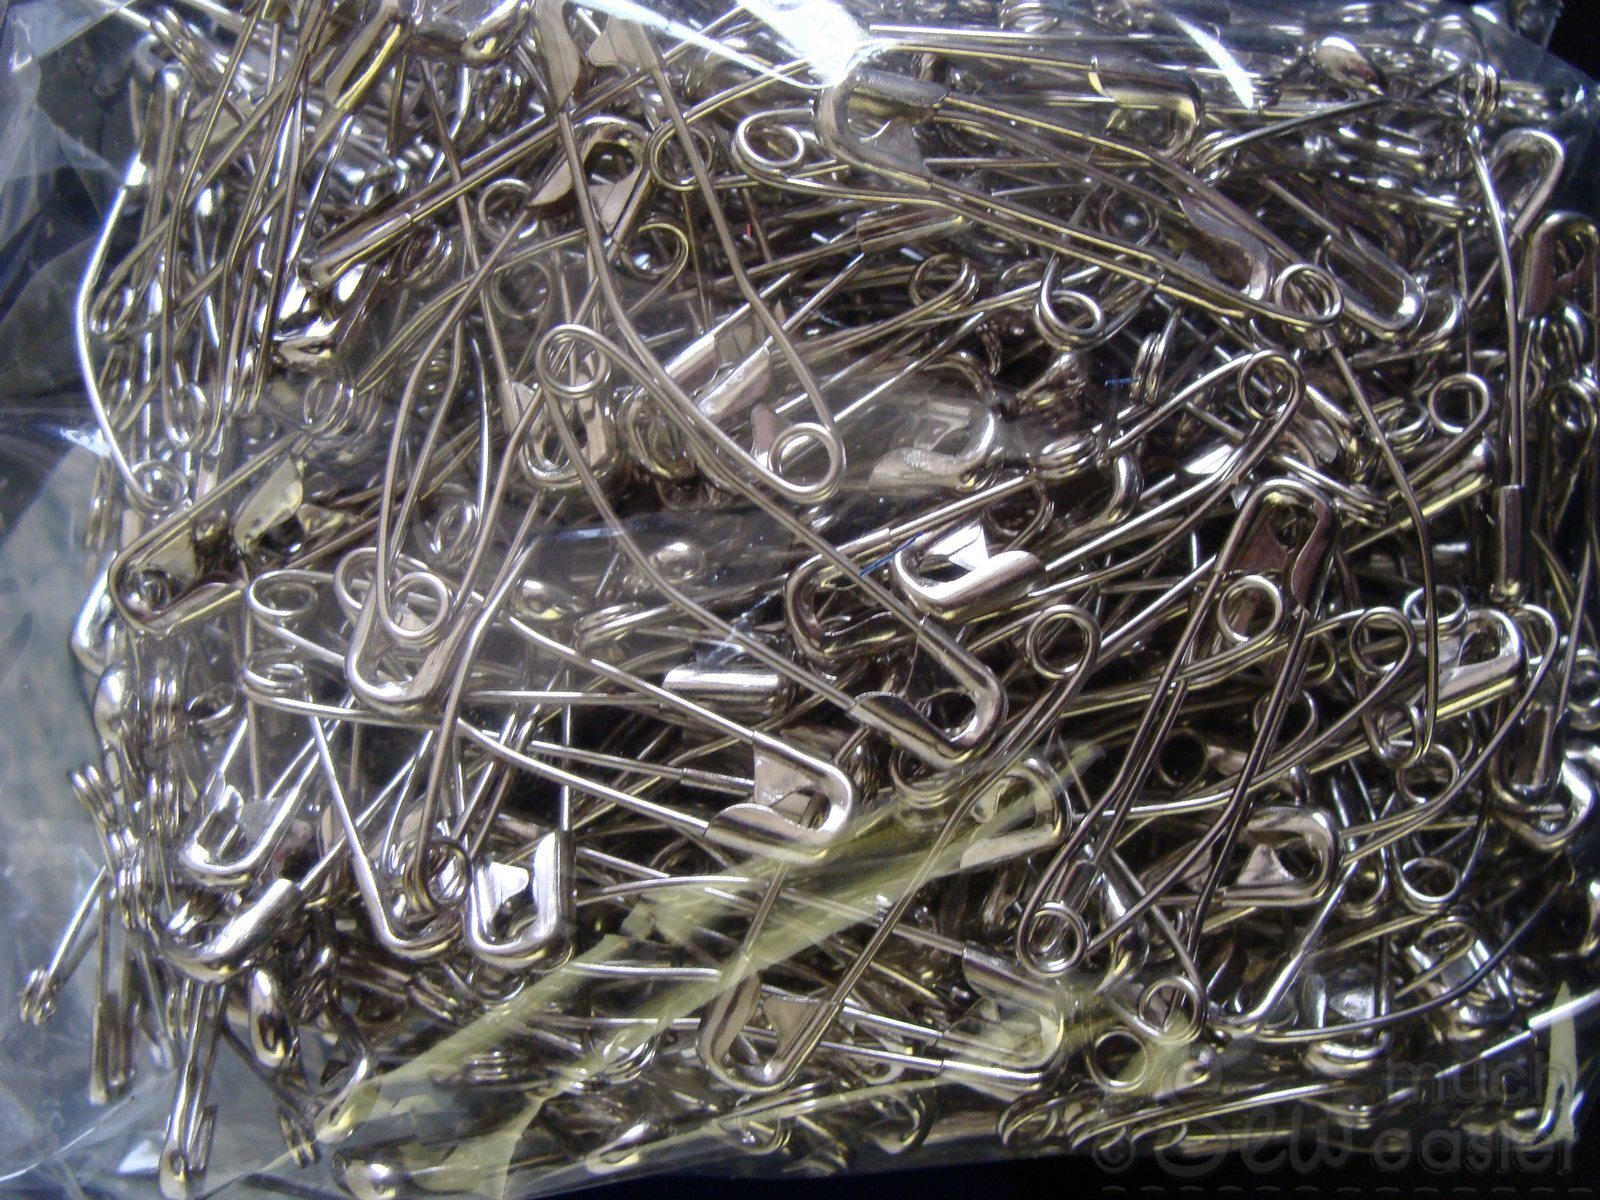 38mm/1.5 TOUHIA 120 Pcs Curved Safety Pins Size 2 Nickel-Plated Steel for Quilting and Knitting 